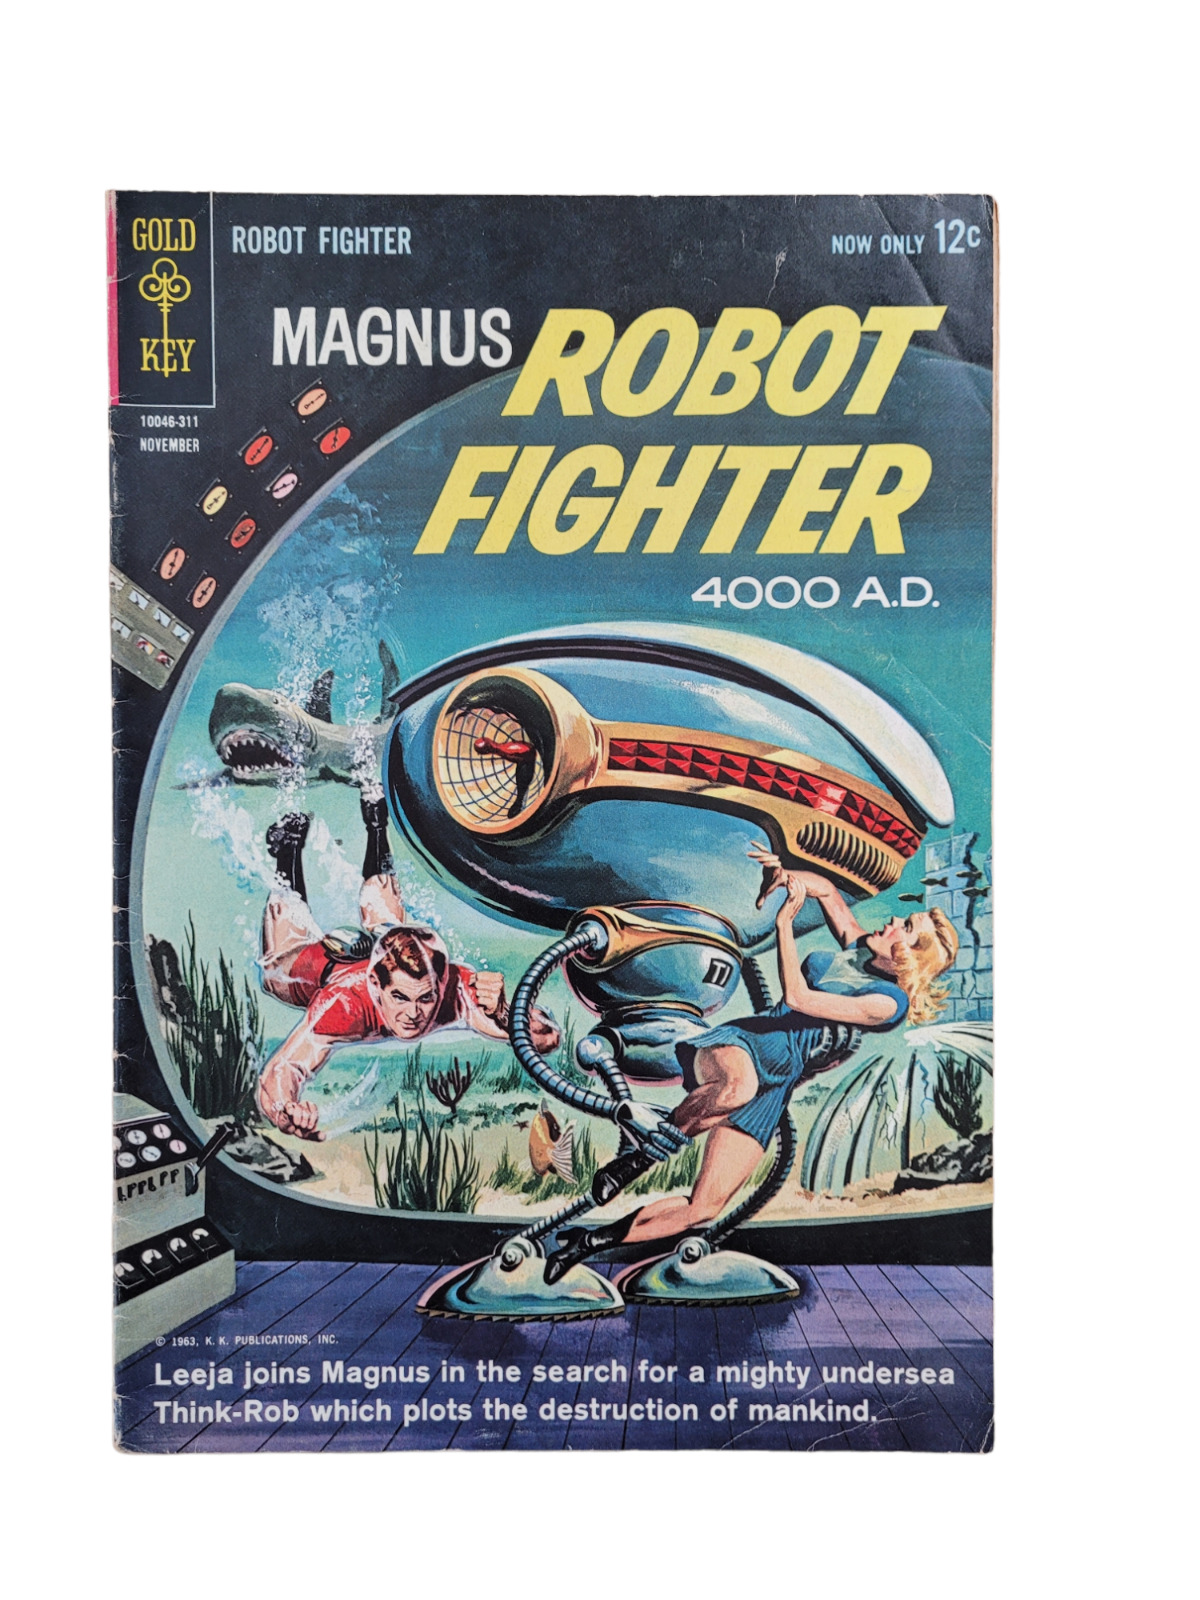 Magnus Robot Fighter 4 Gold Key Comic Book 4000 AD Silver Age 1963 Sci Fi VG RAW